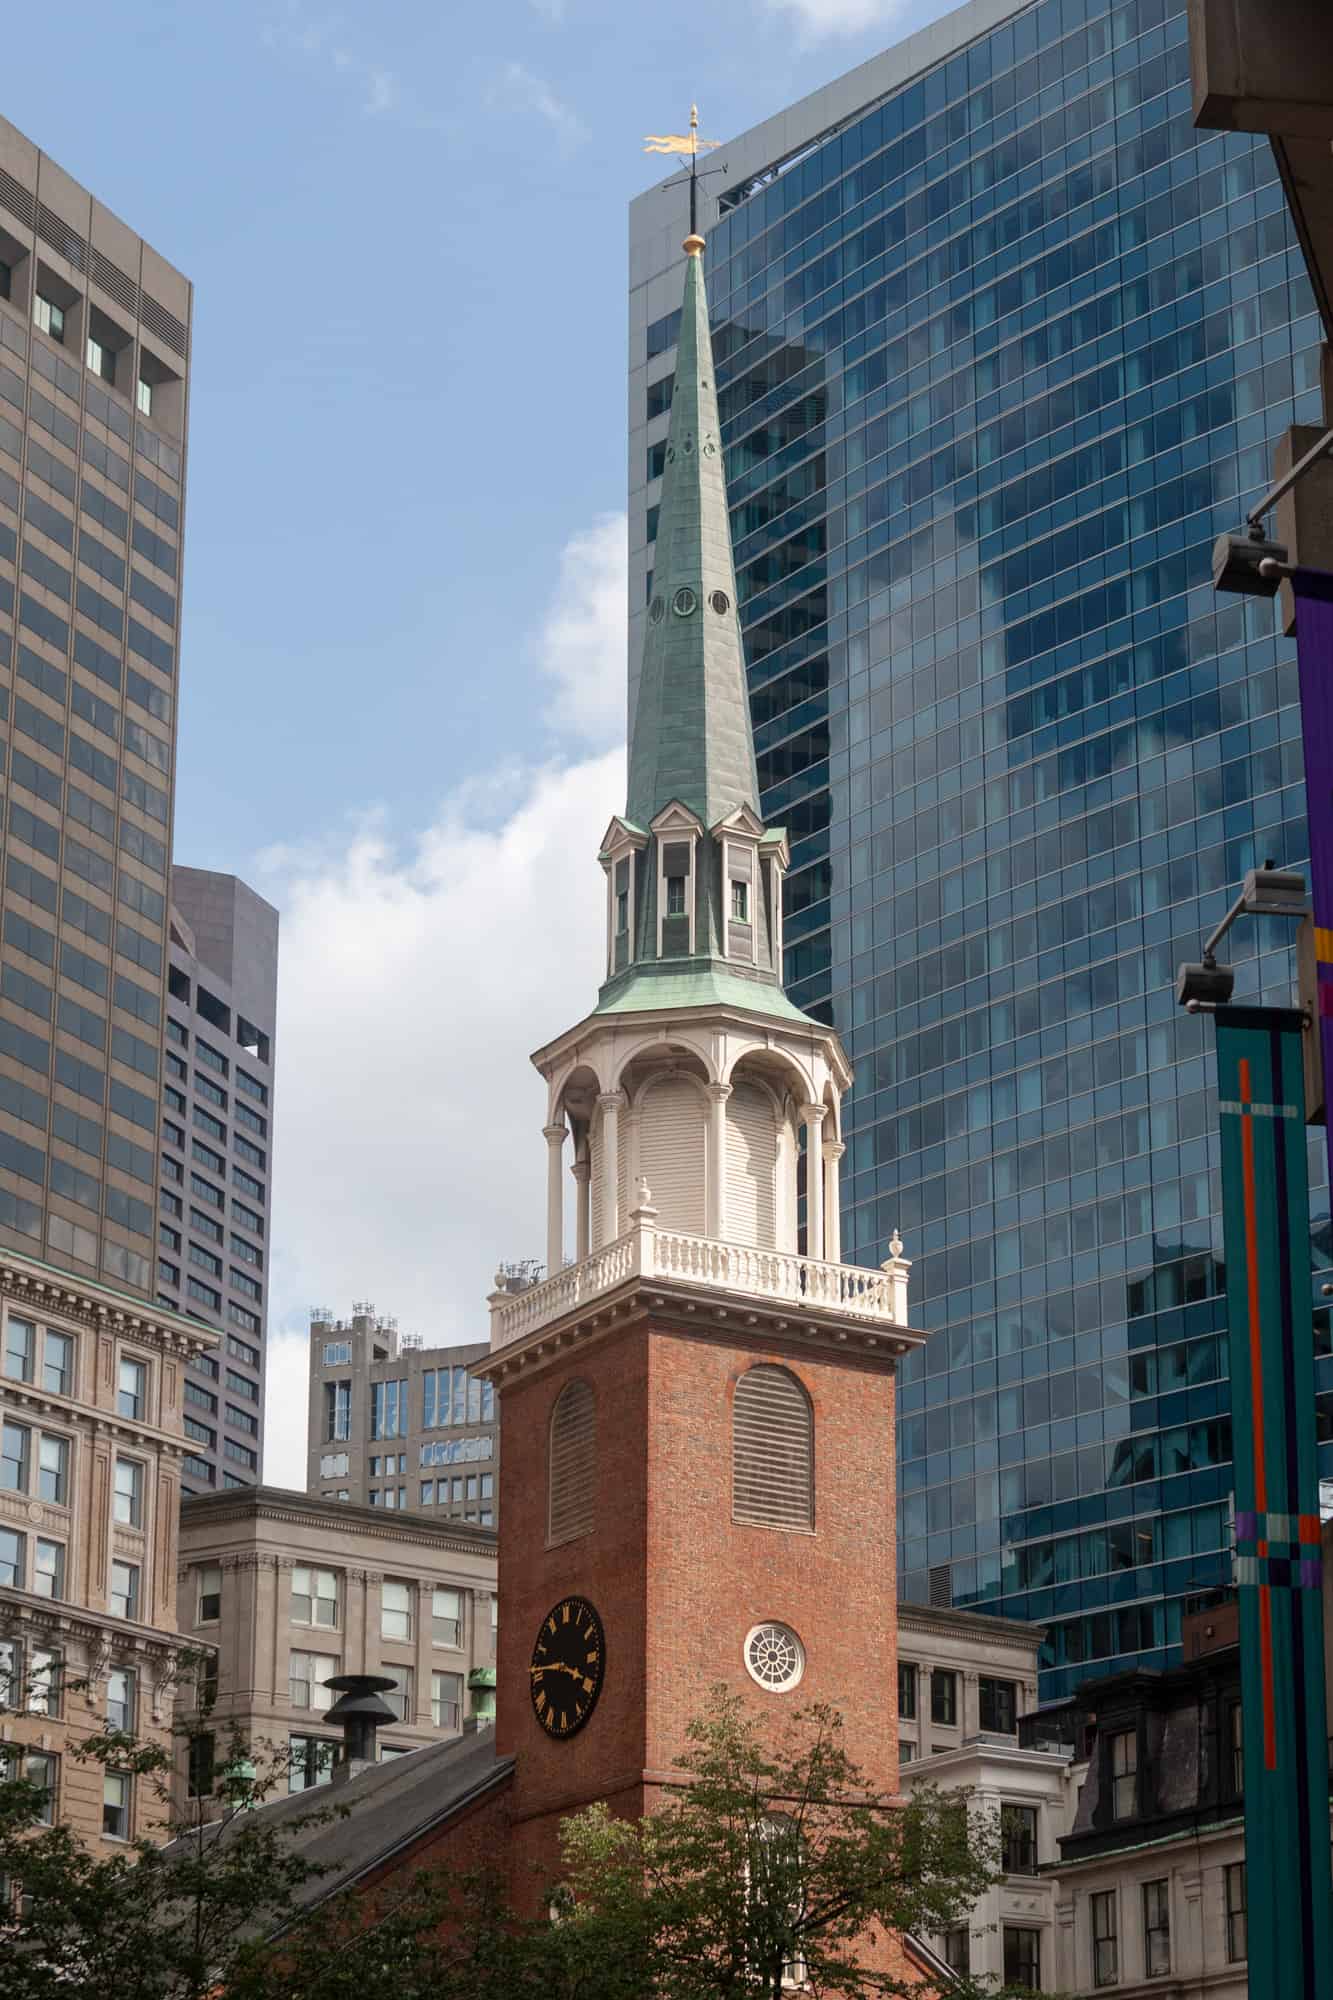 the old south meeting house looks small and historic set in among the tall glass buildings nearby, the meeting house is on our list of things to do with one day in boston